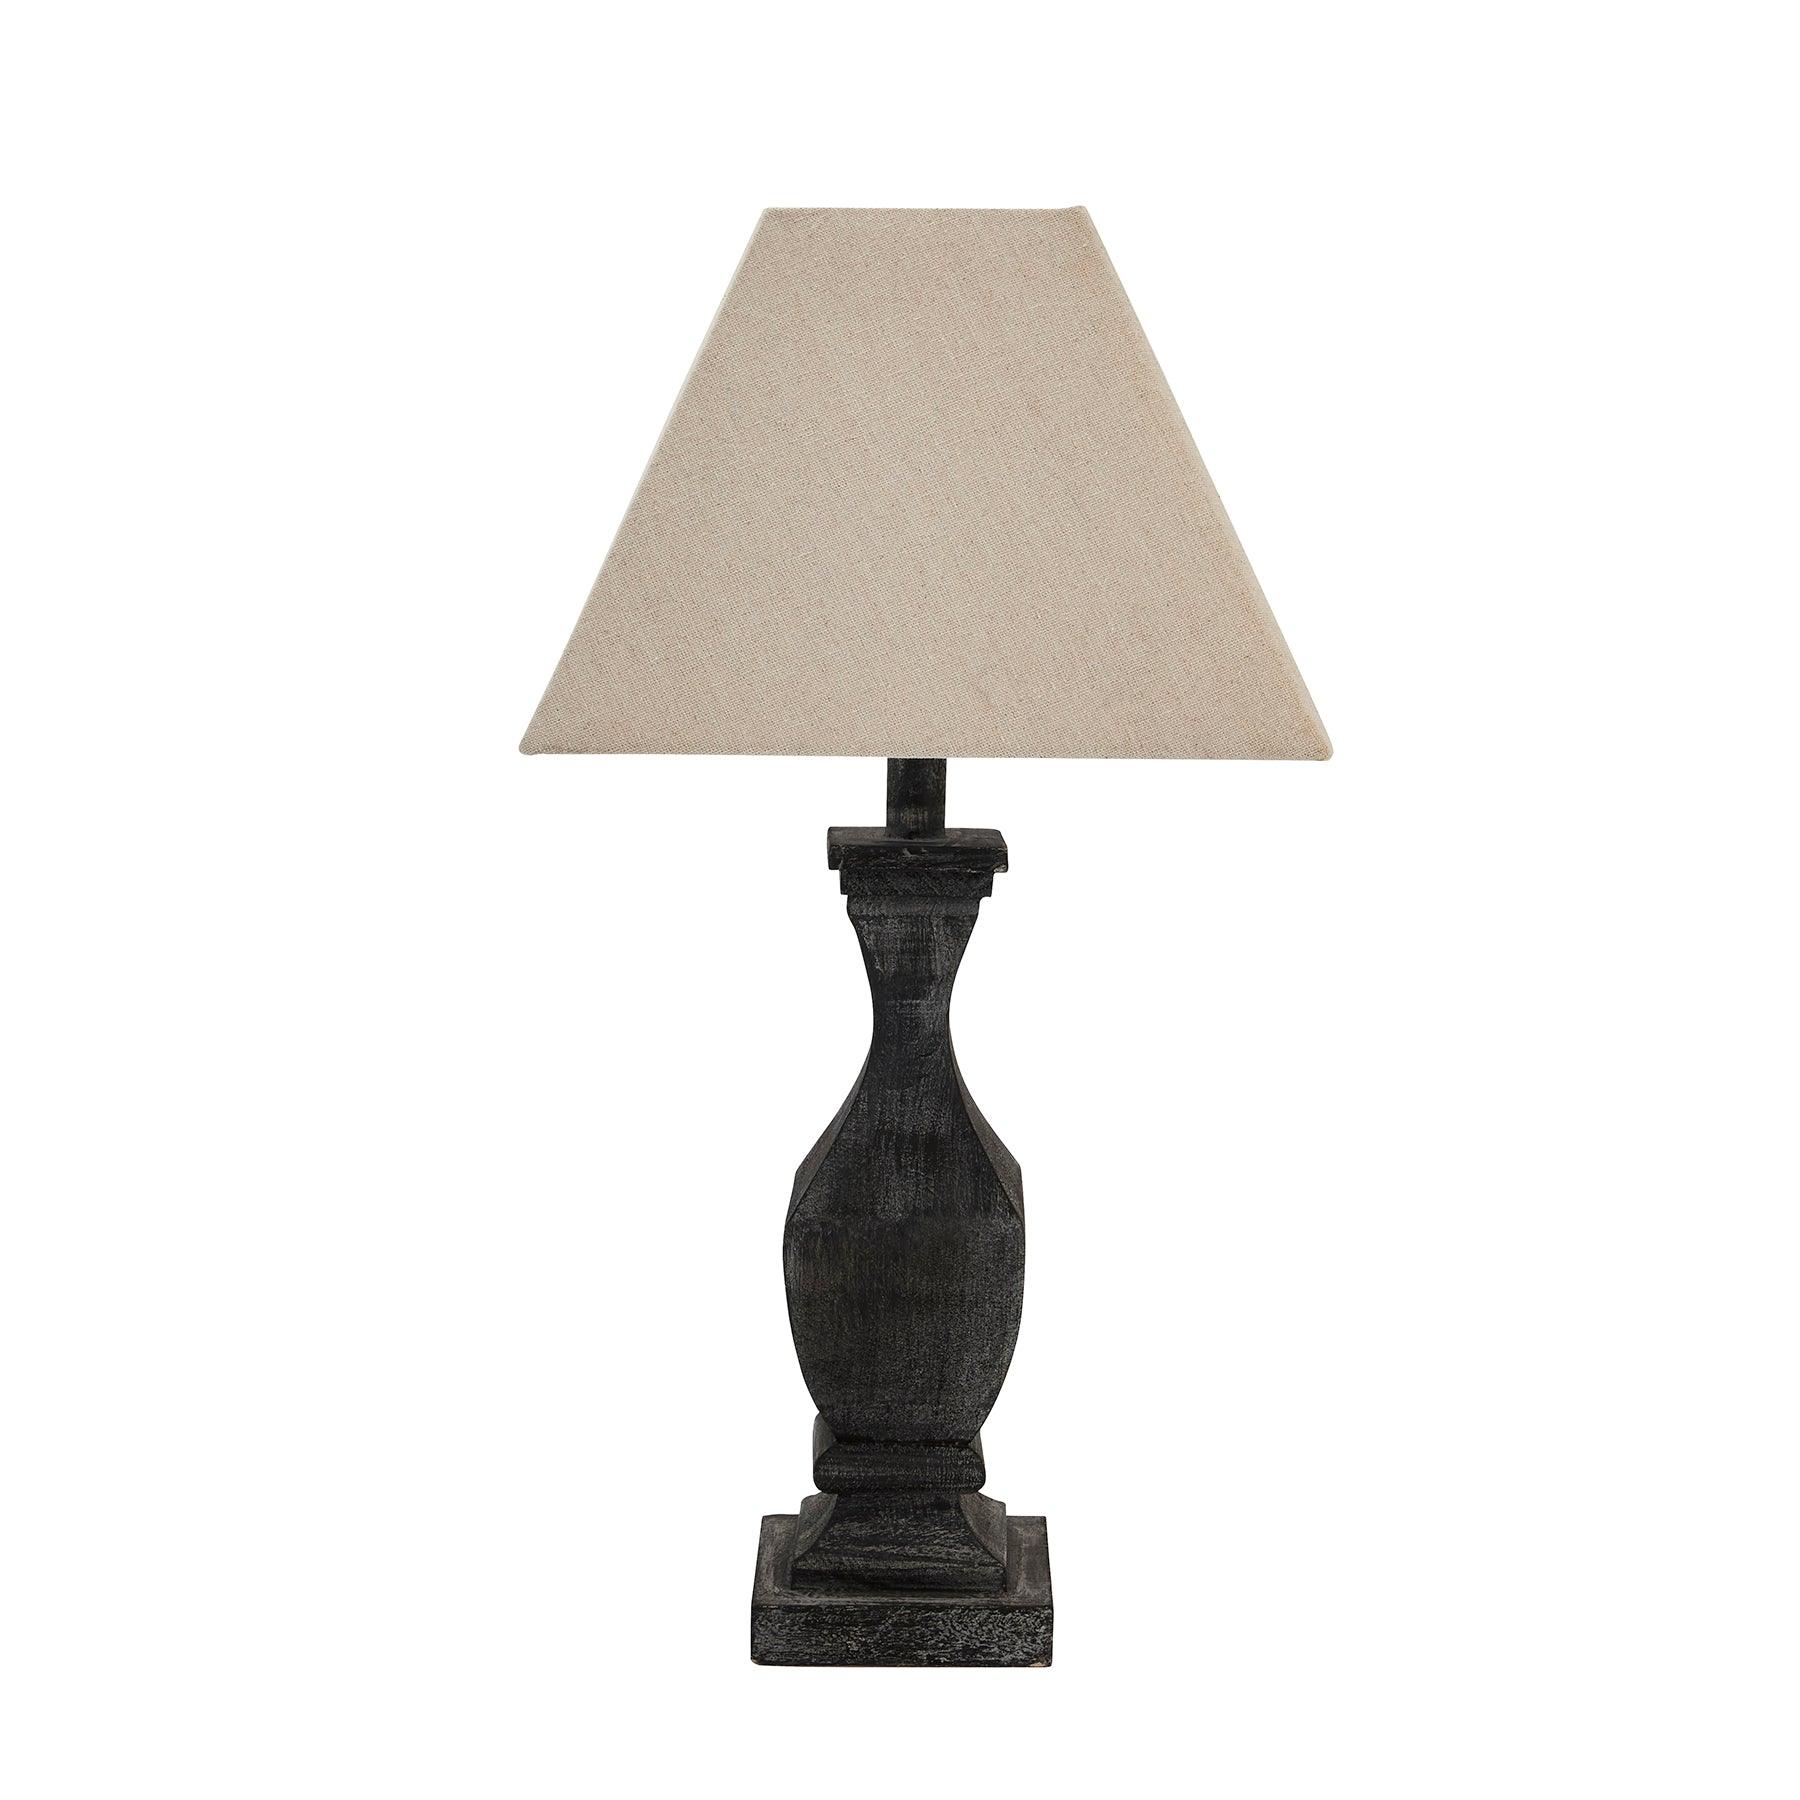 View Incia Fluted Wooden Table Lamp information